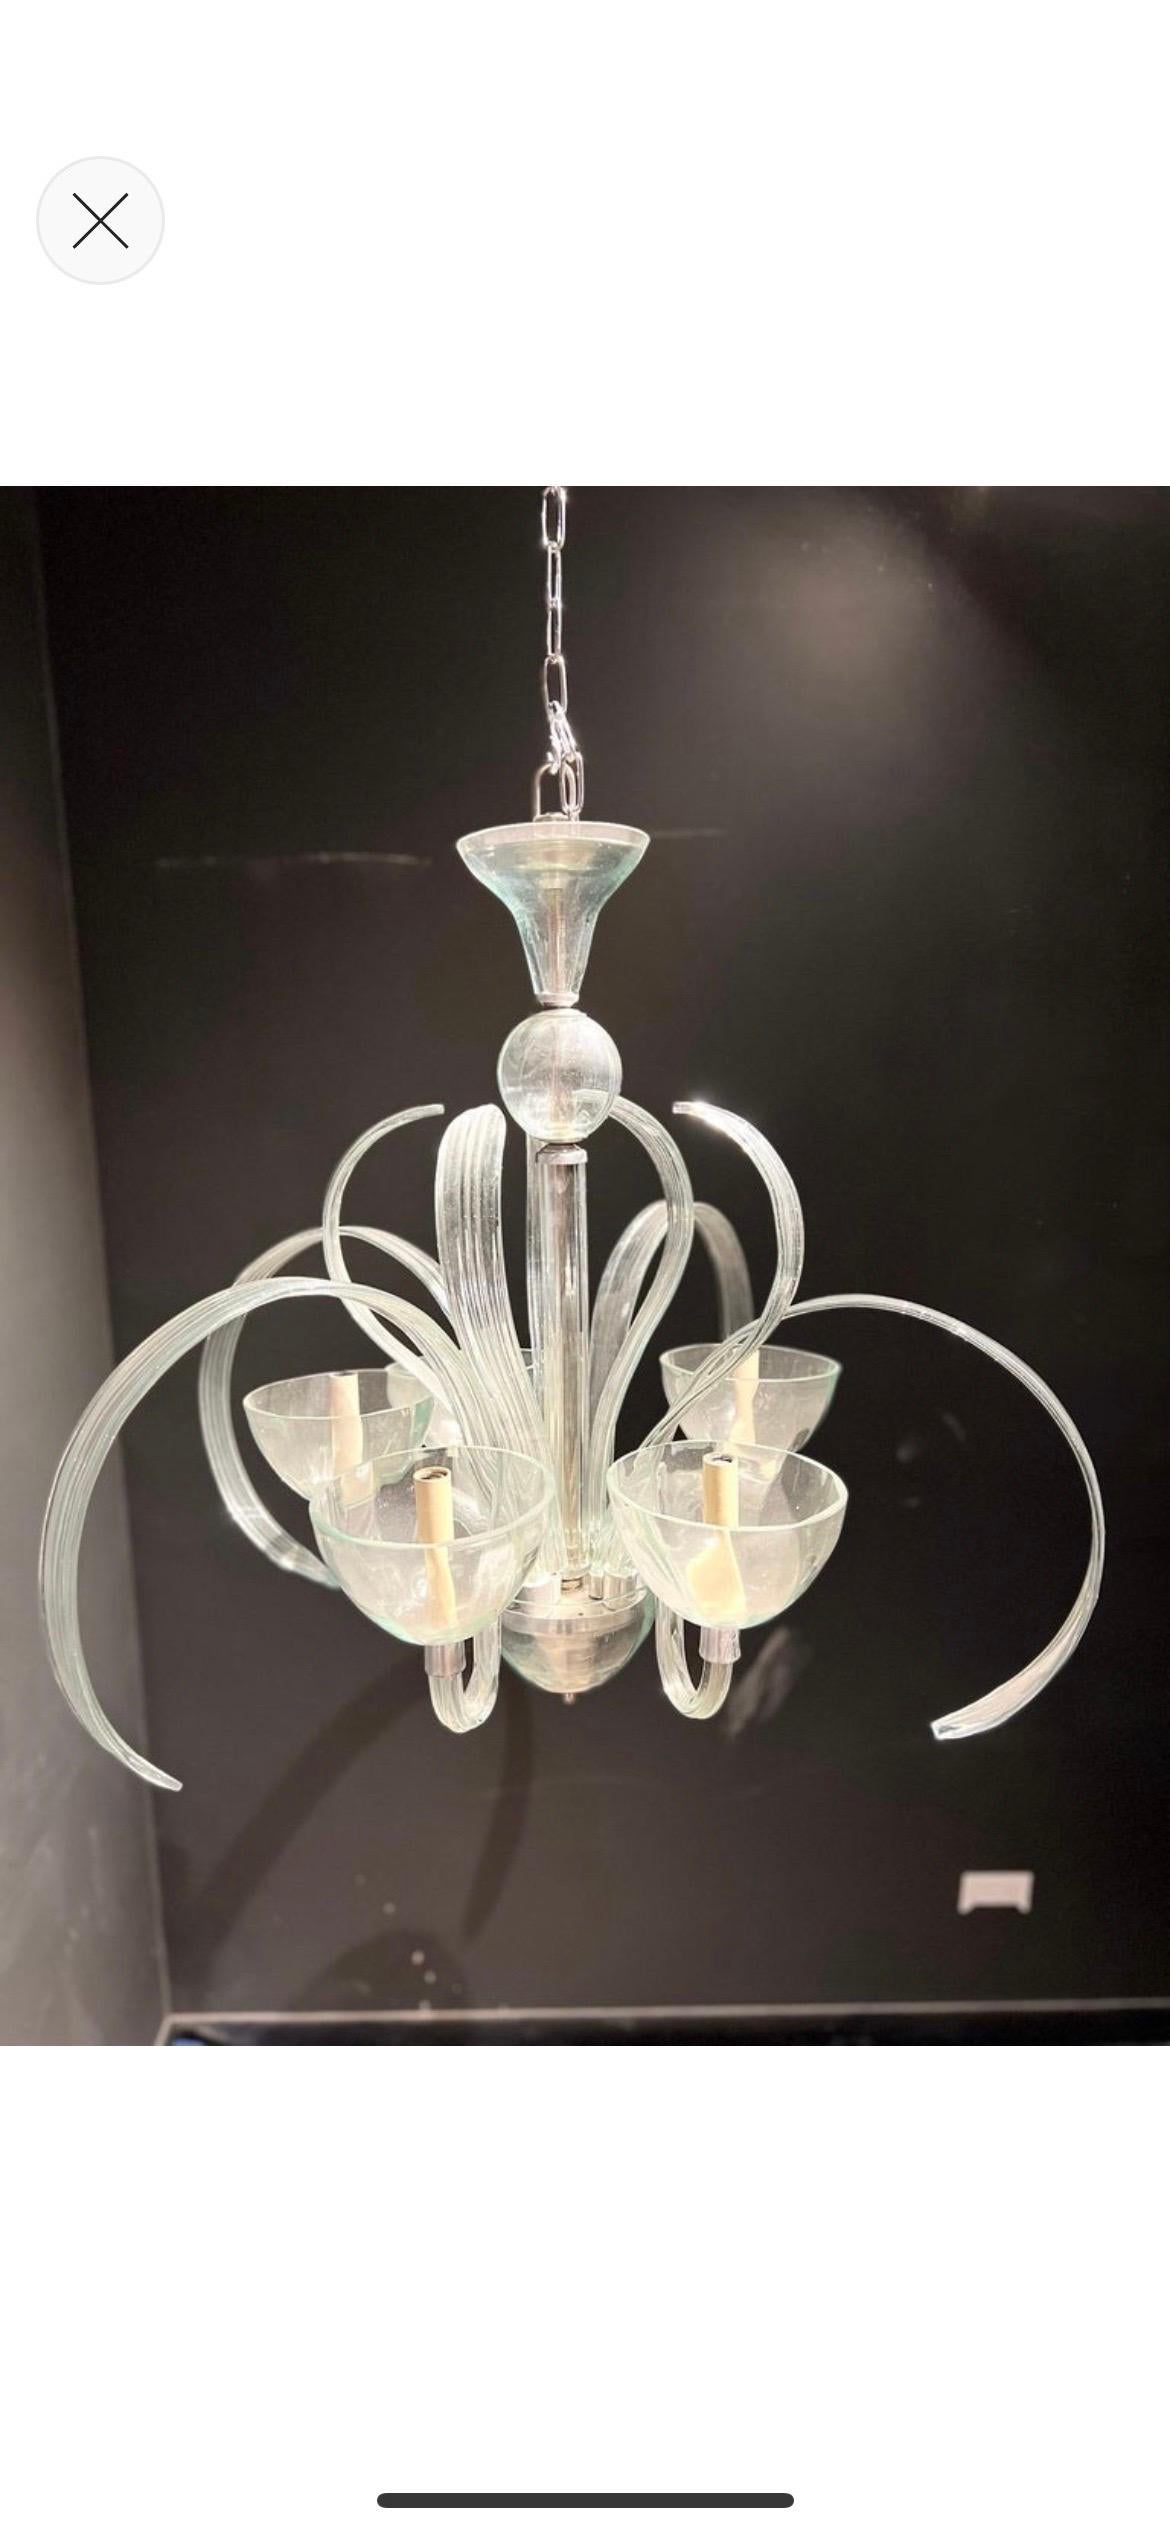 A circa 1940’s Murano clear glass chandelier with 5 lights